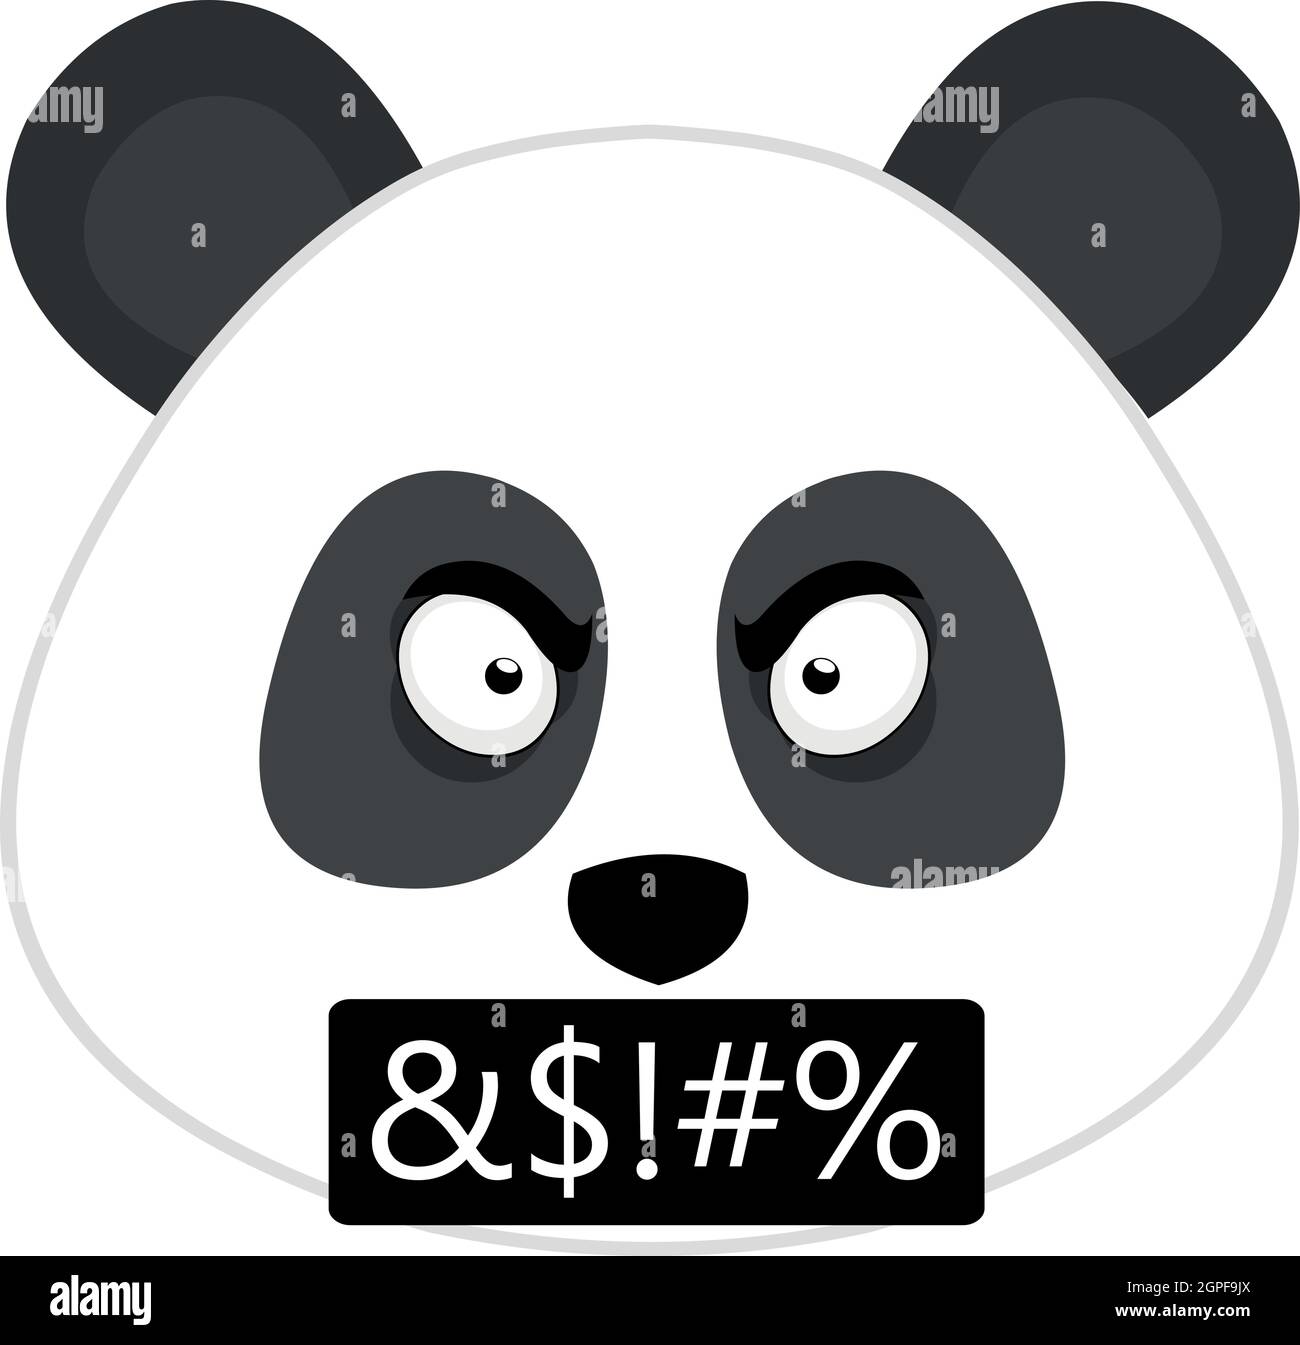 Vector emoticon illustration of the face of a cartoon panda bear with an angry expression and insults Stock Vector